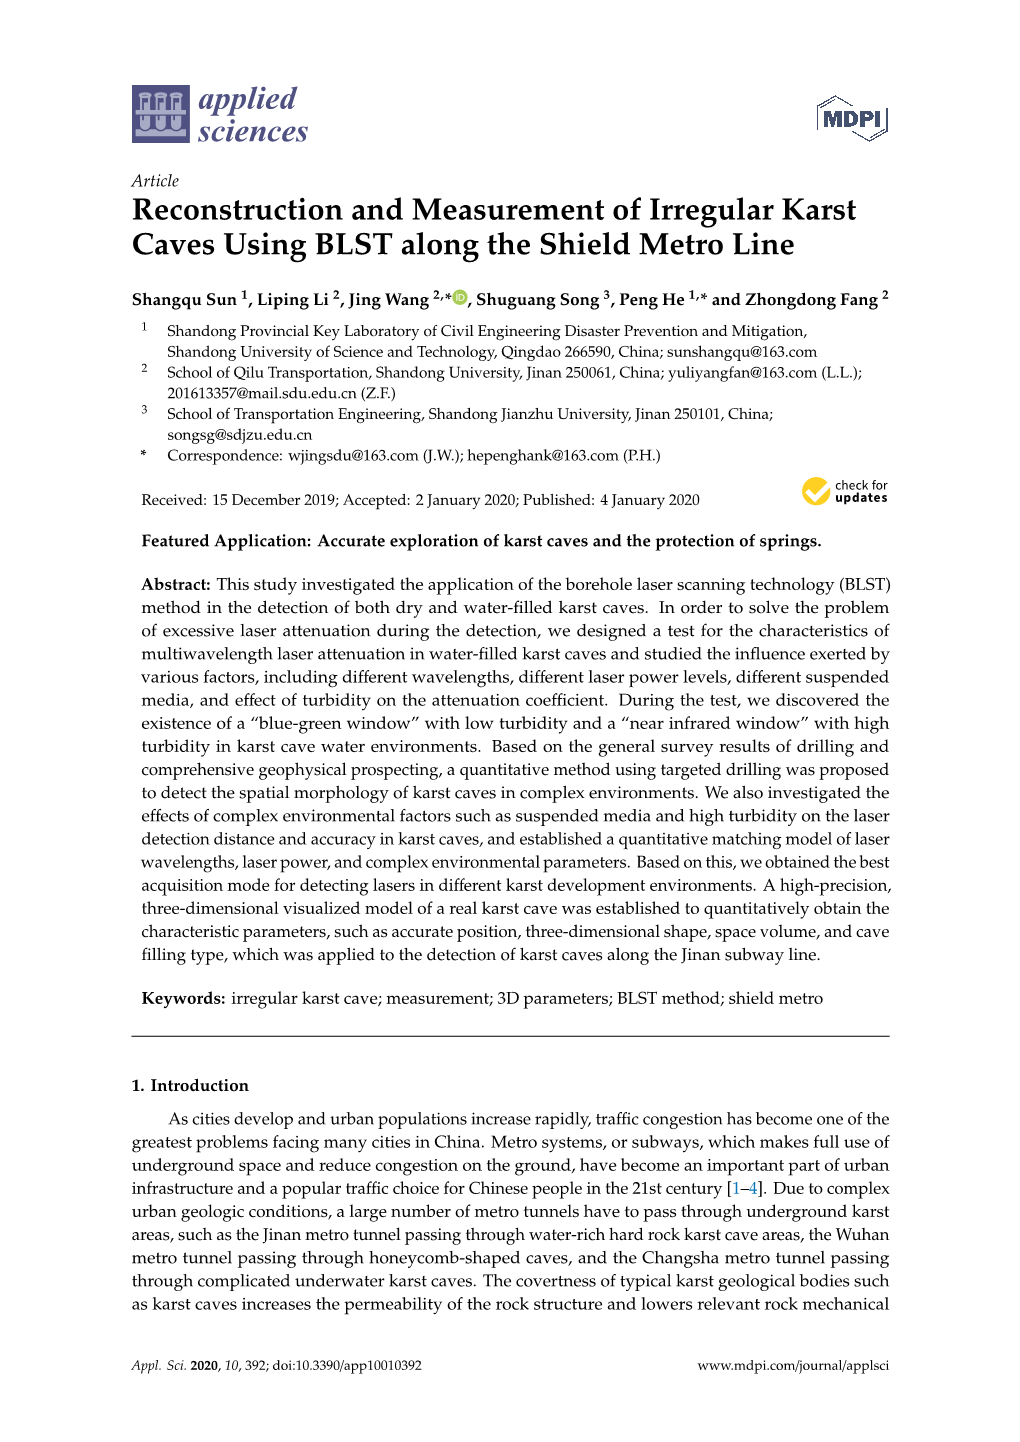 Reconstruction and Measurement of Irregular Karst Caves Using BLST Along the Shield Metro Line